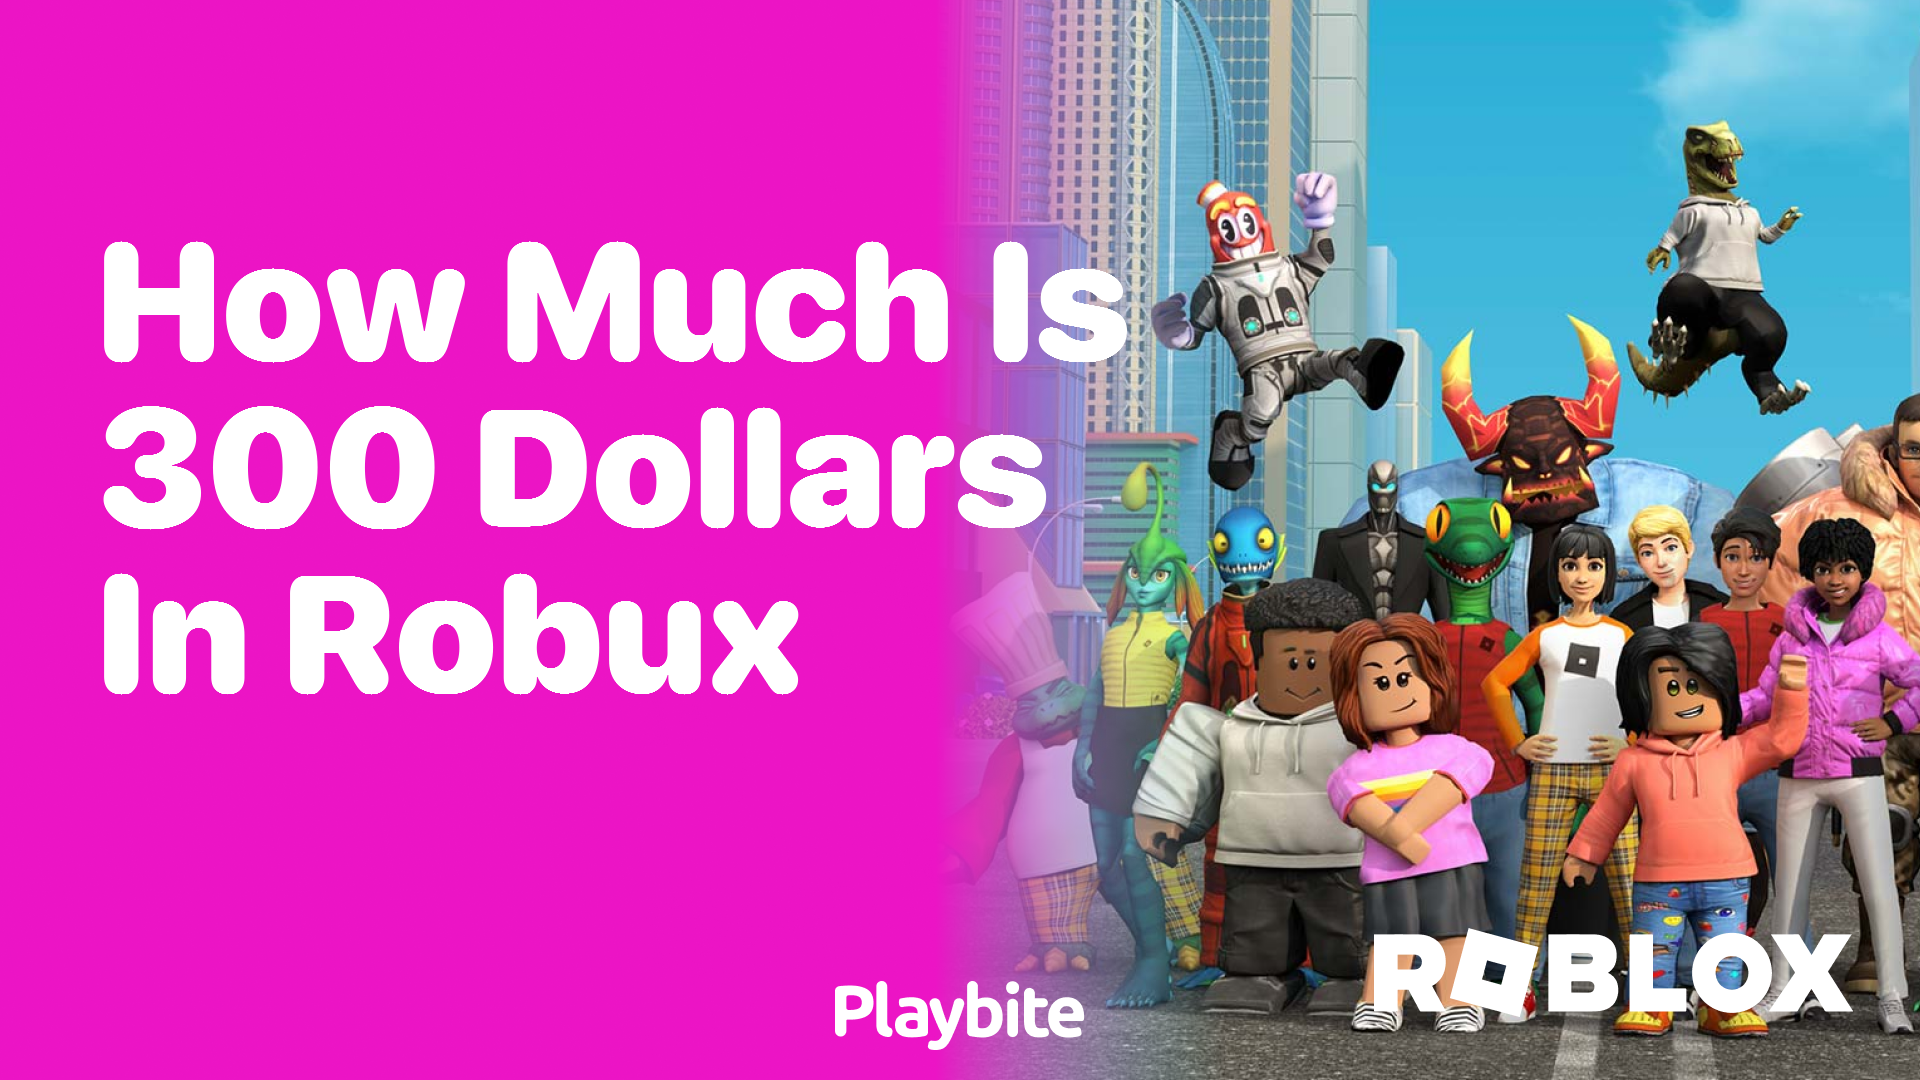 How Much Is 300 Dollars in Robux?